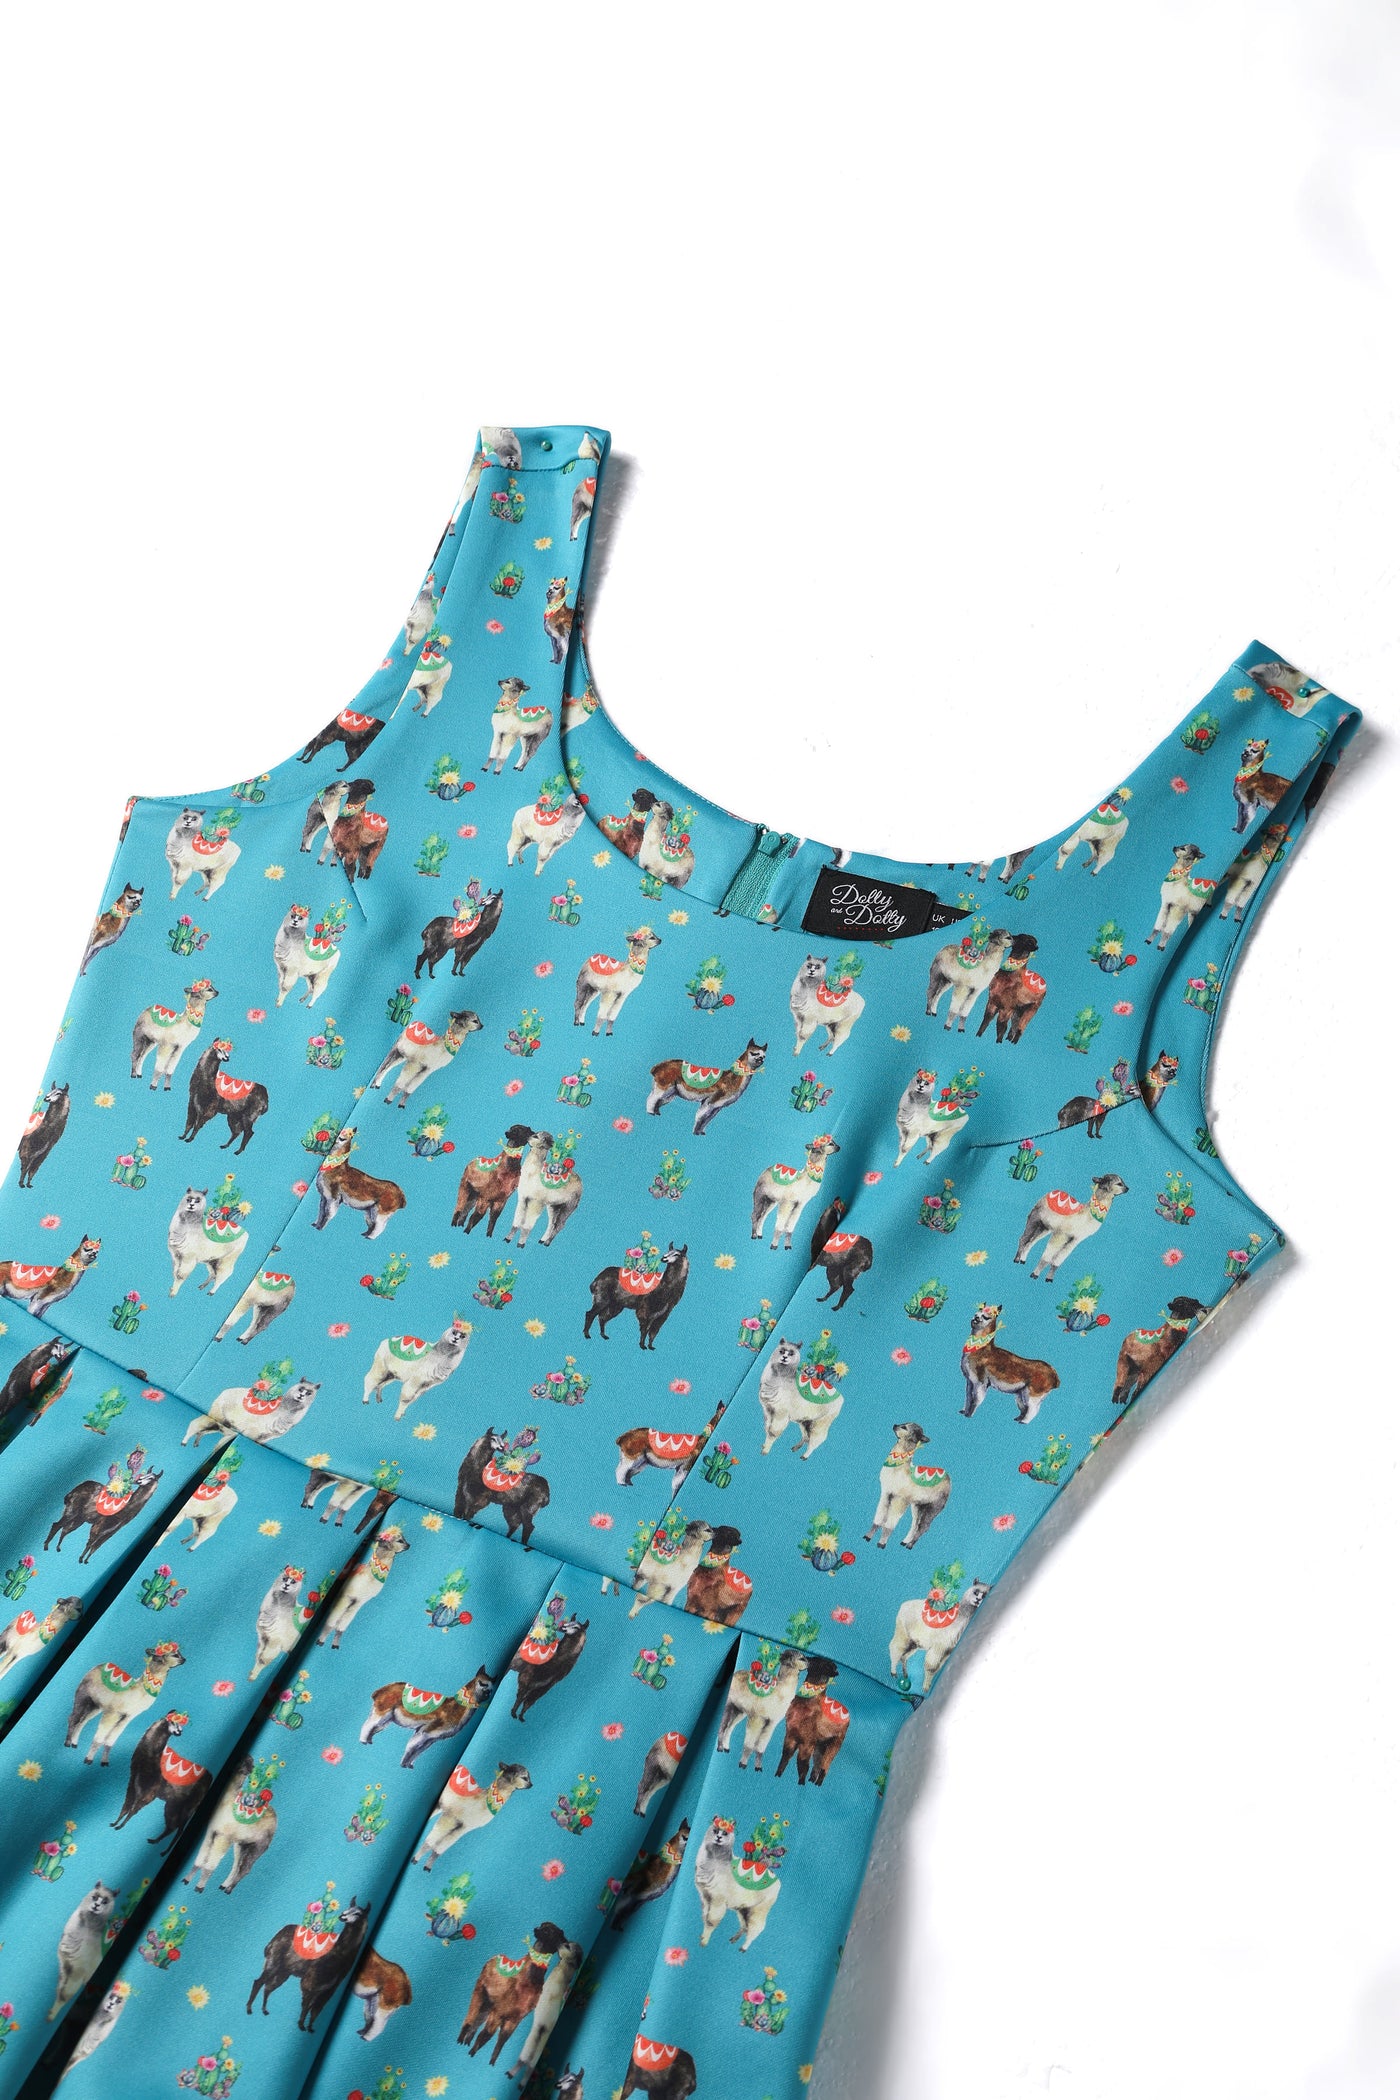 Top view of our sleeveless Amanda swing dress, in turquoise llama cactus print